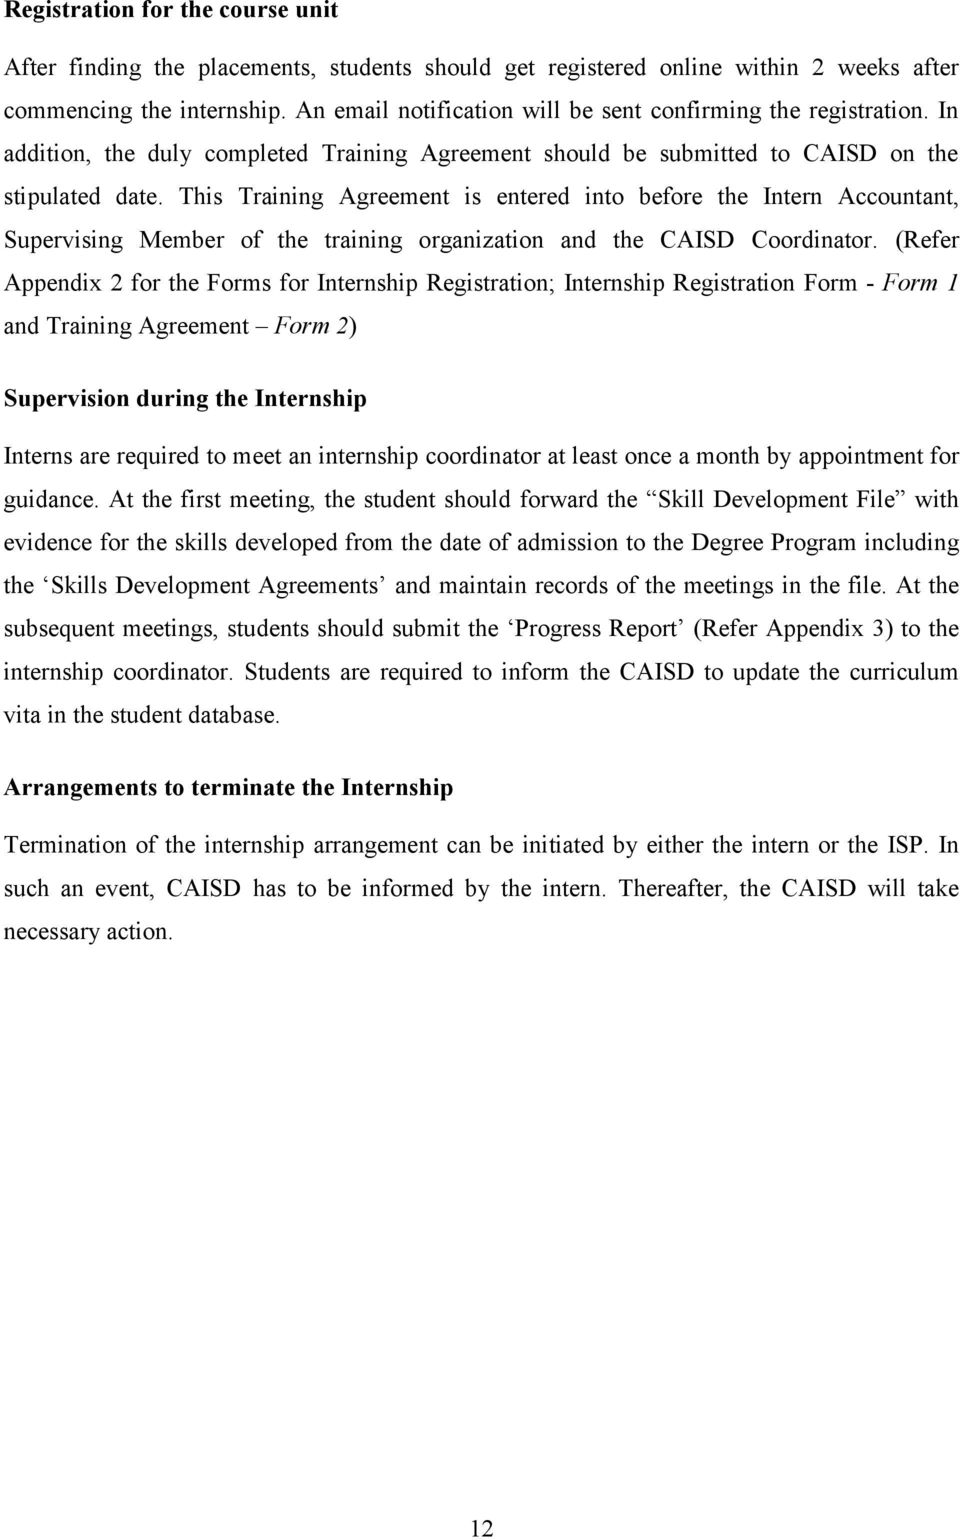 This Training Agreement is entered into before the Intern Accountant, Supervising Member of the training organization and the CAISD Coordinator.